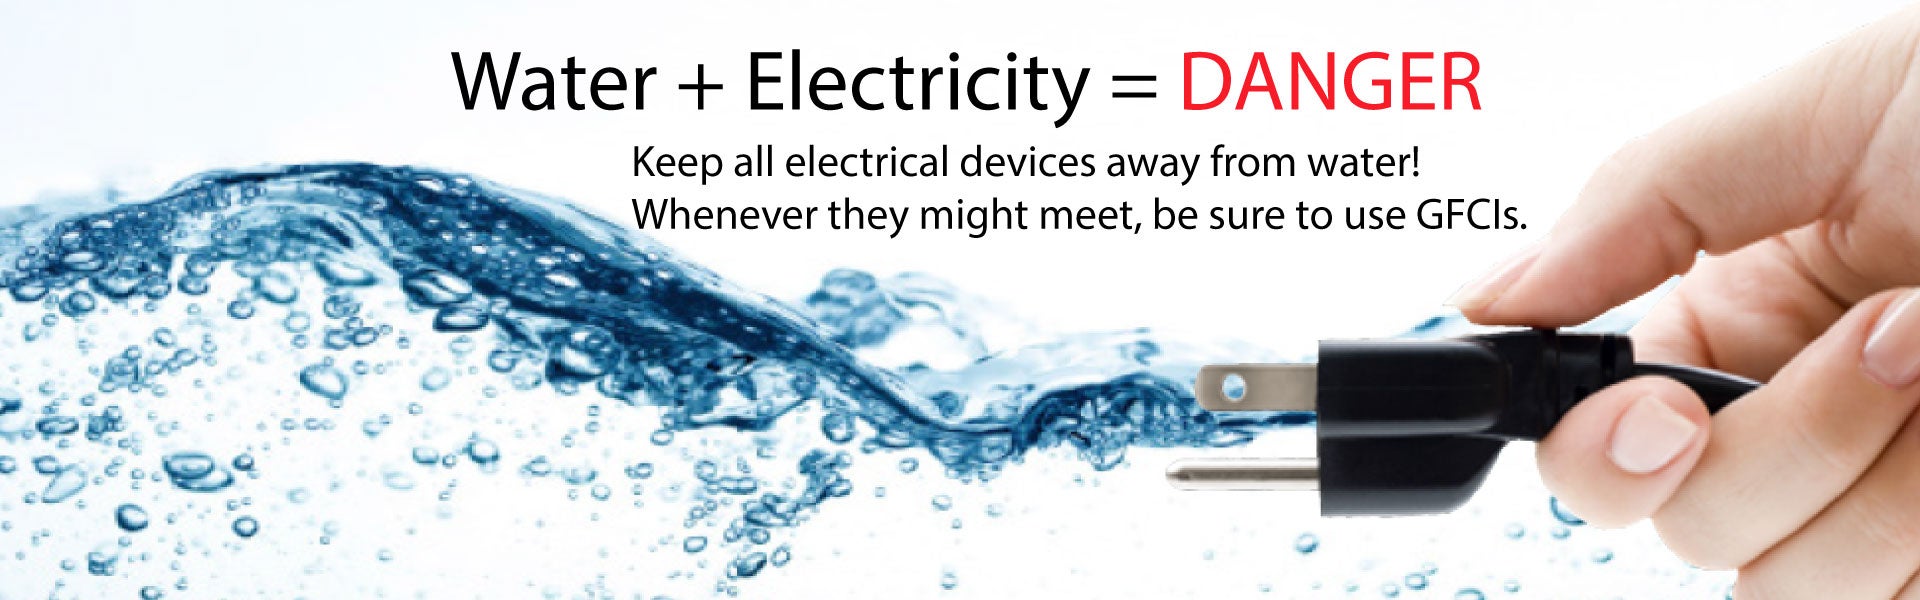 water and electricity equal danger